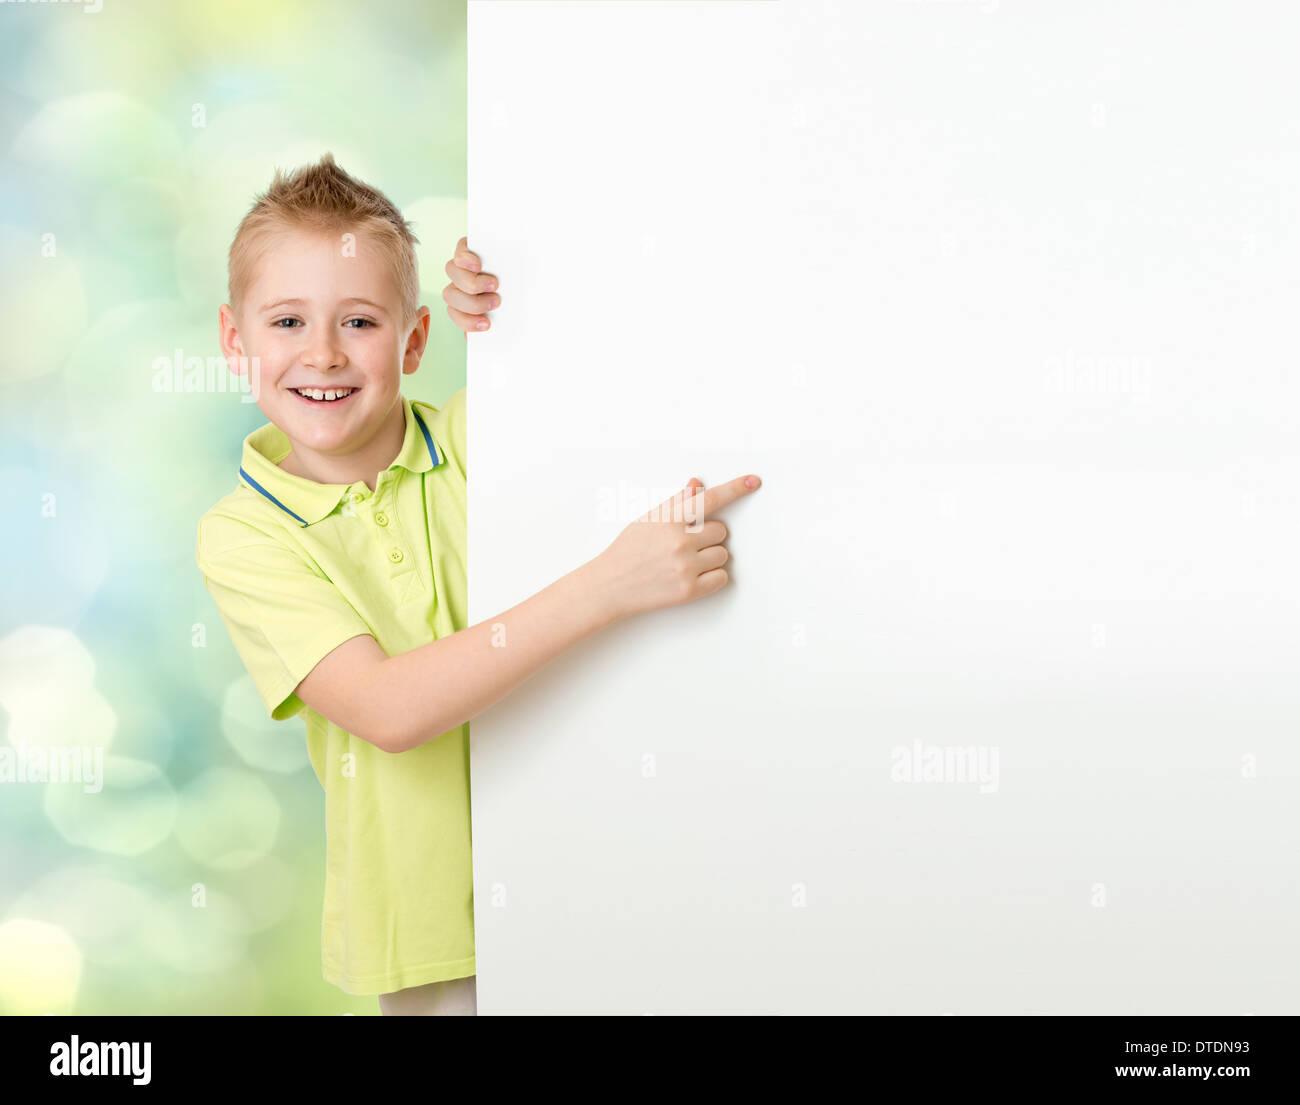 Handsome boy pointing to blank advertisement banner Stock Photo